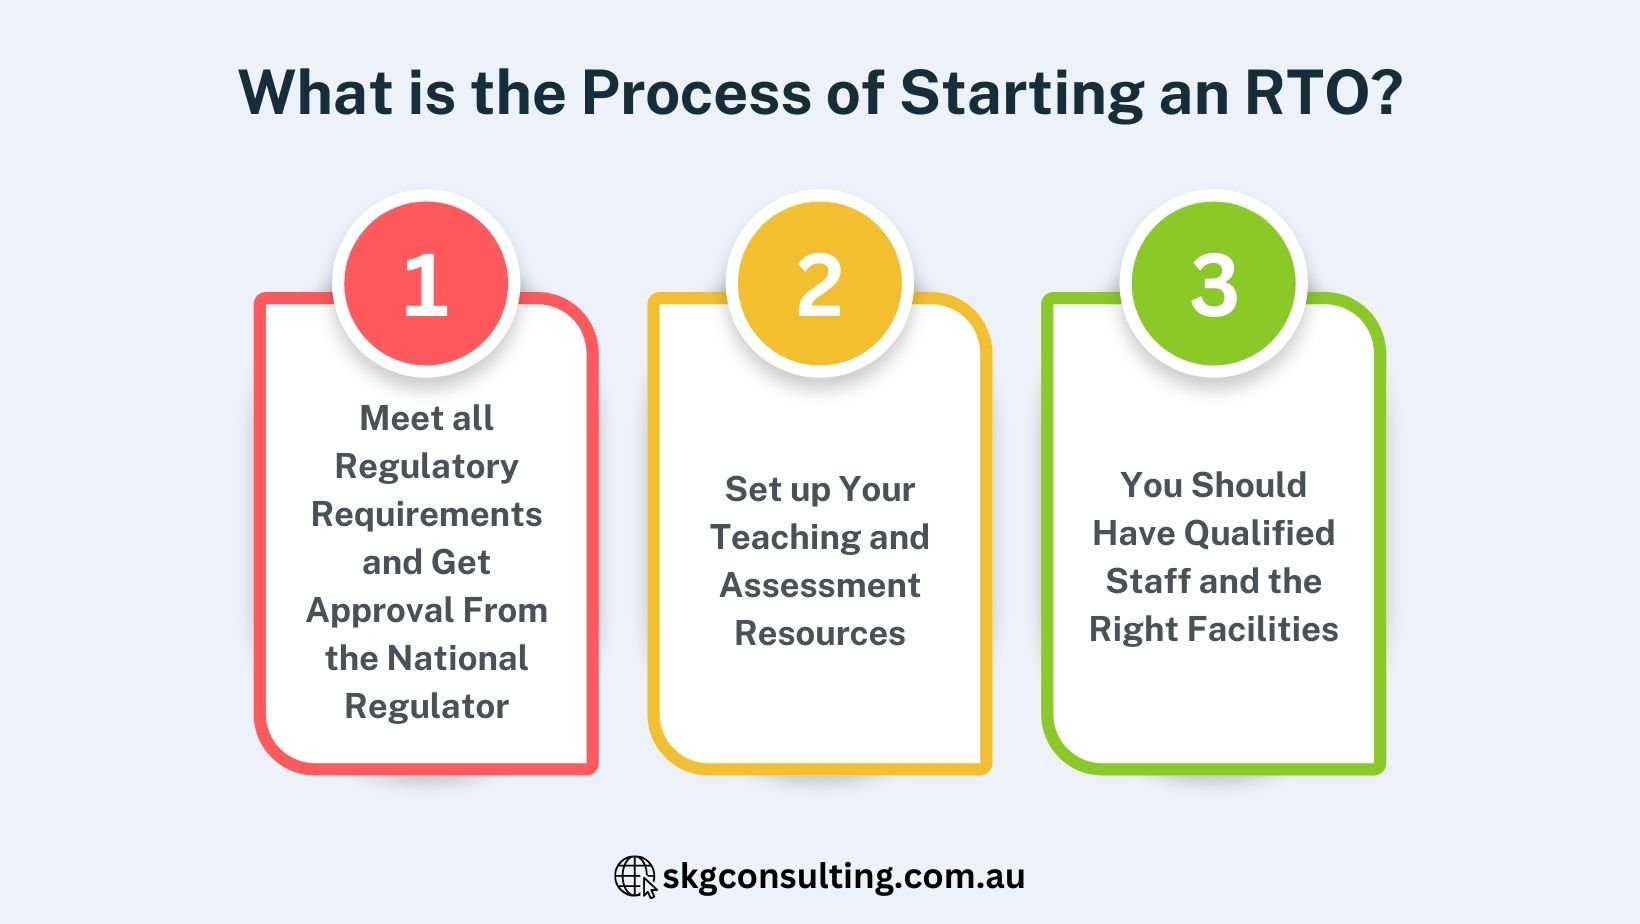 What is the Process of Starting an RTO